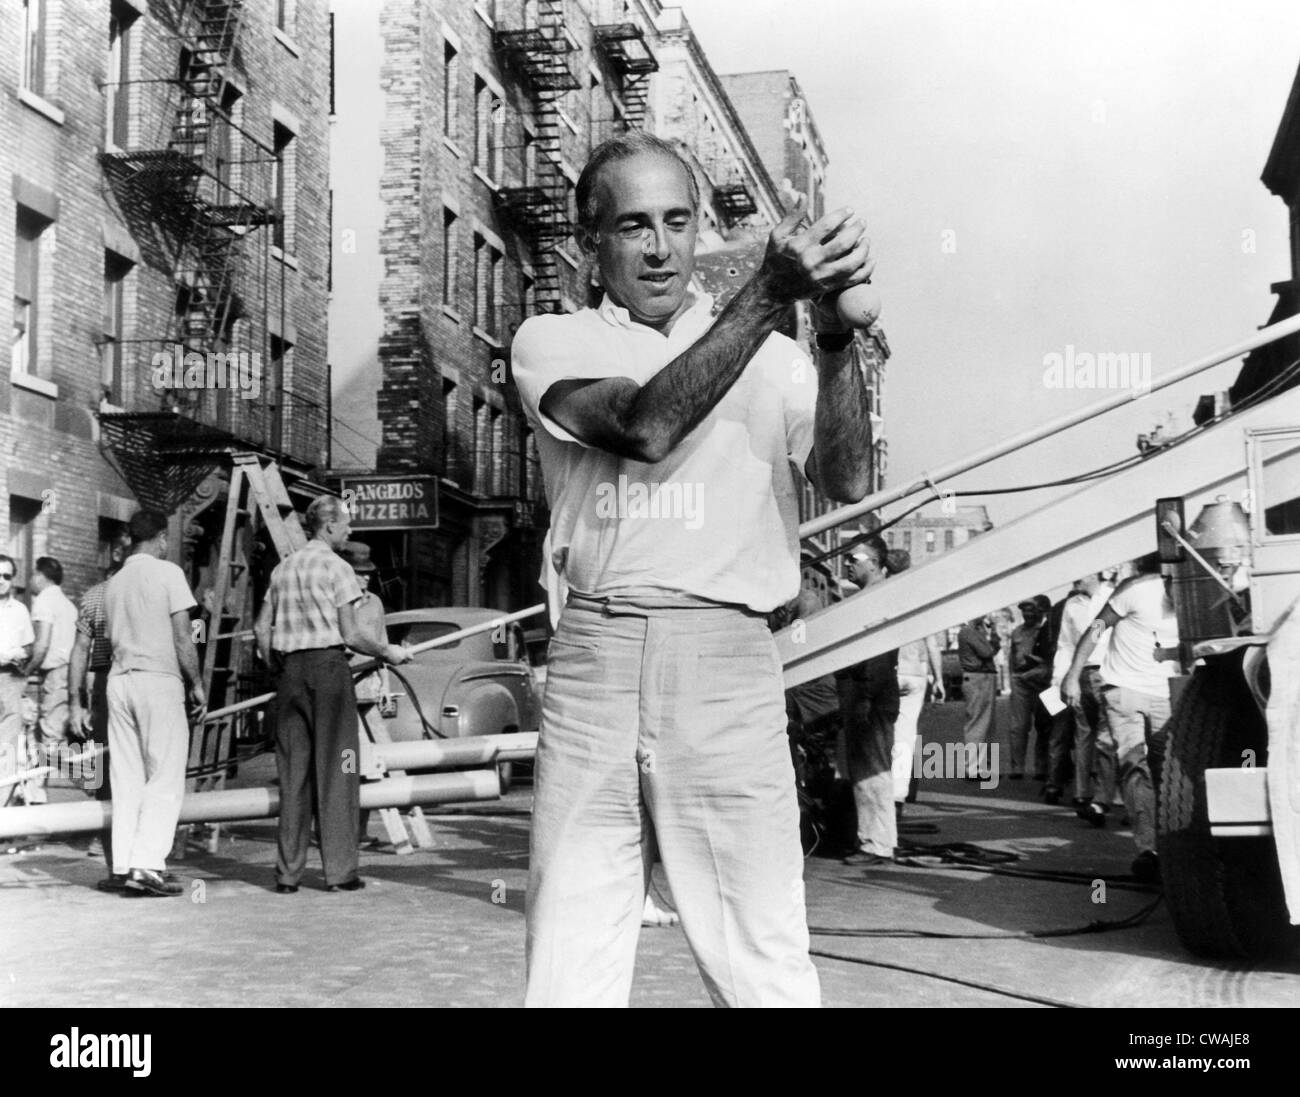 WEST SIDE STORY, choreographer and co-director Jerome Robbins, on set, 1961.. Courtesy: CSU Archives / Everett Collection Stock Photo